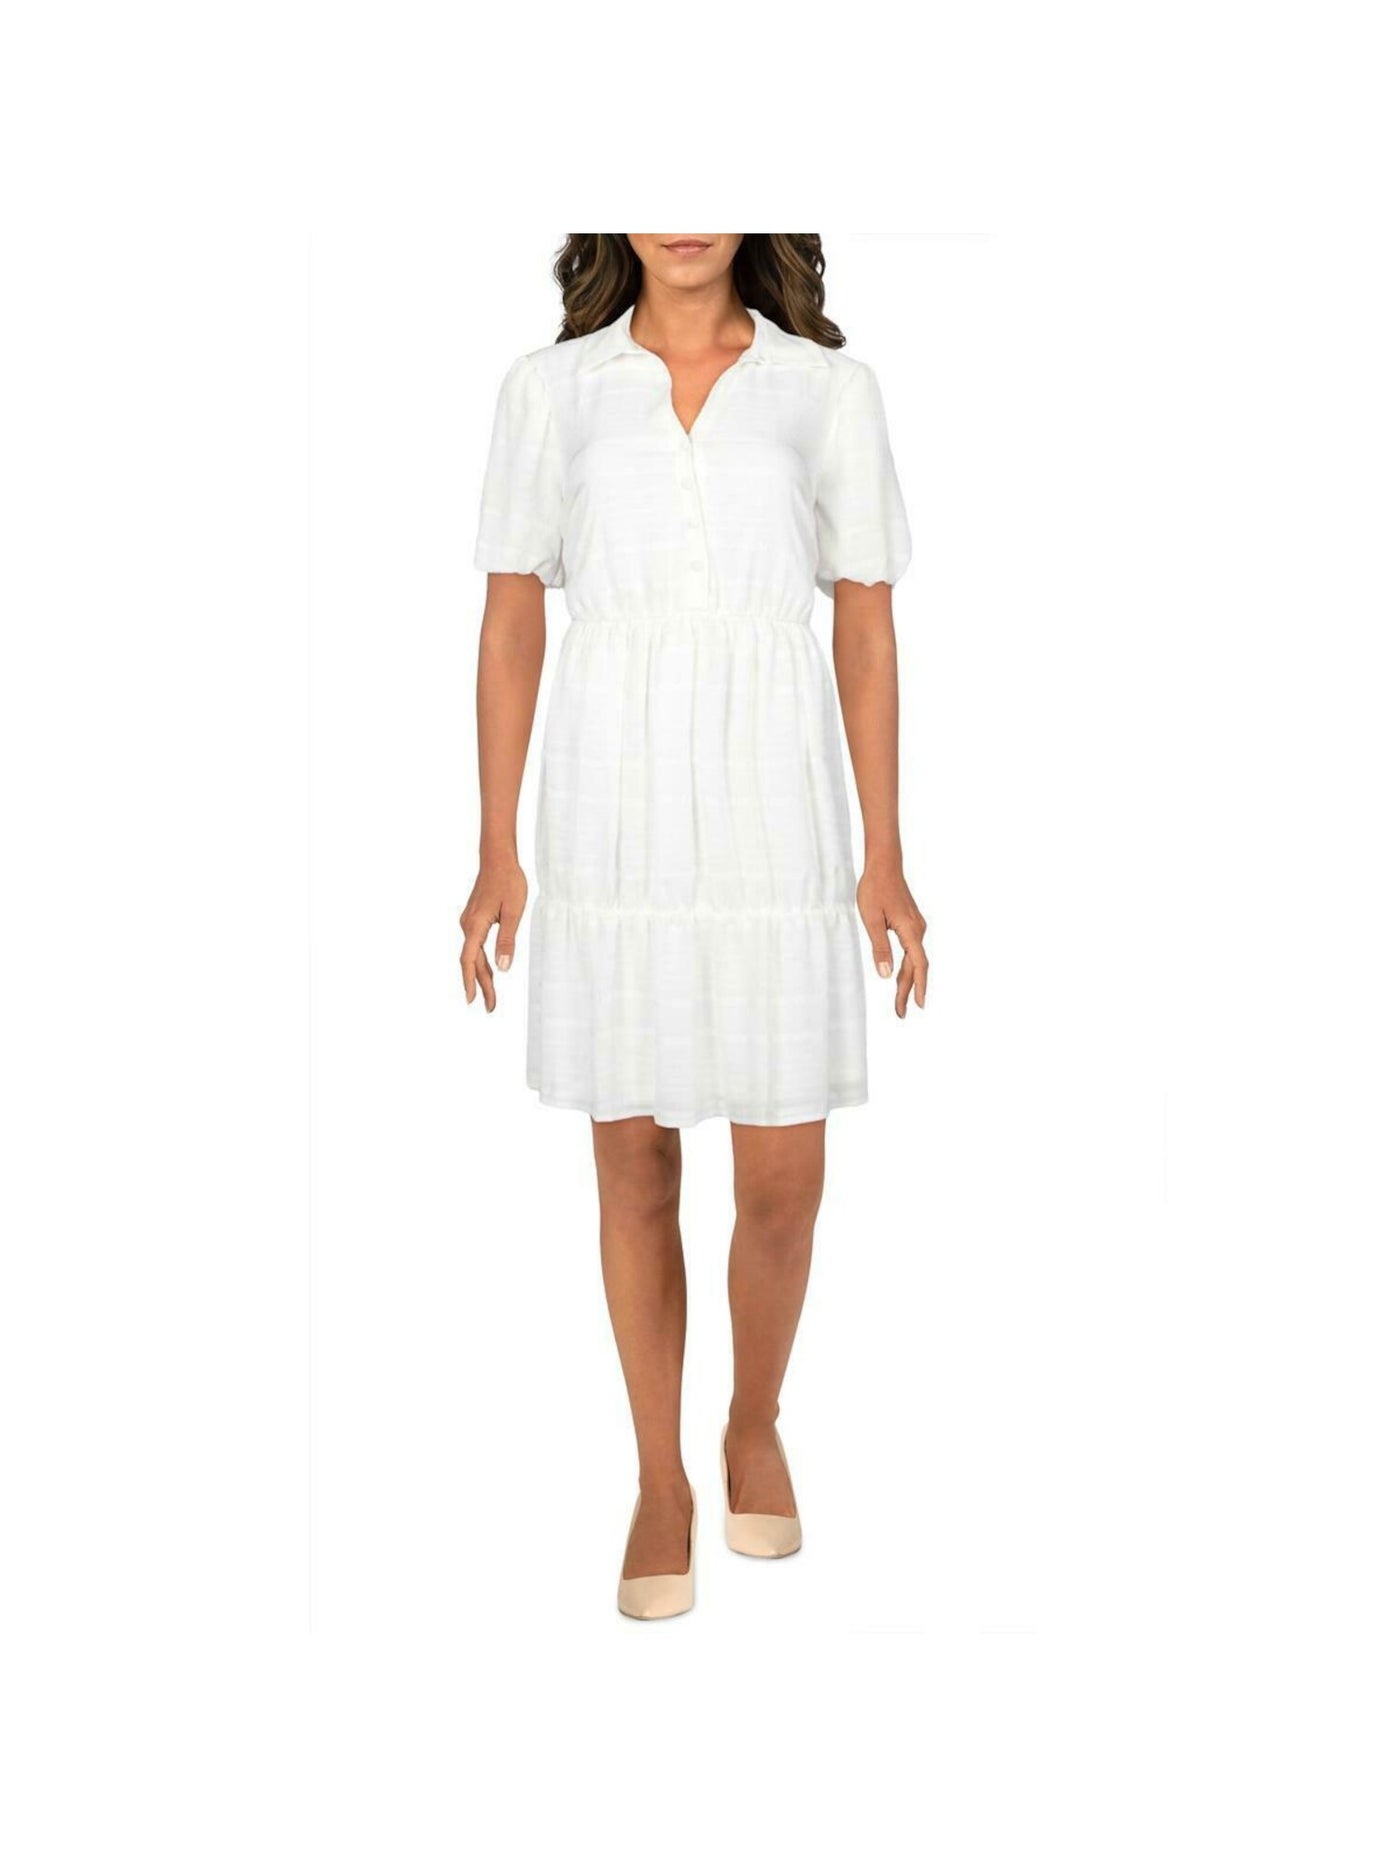 KENSIE DRESSES Womens White Stretch Textured Ruffled Sheer Lined Button Front Short Sleeve Collared Above The Knee Evening Sheath Dress 10